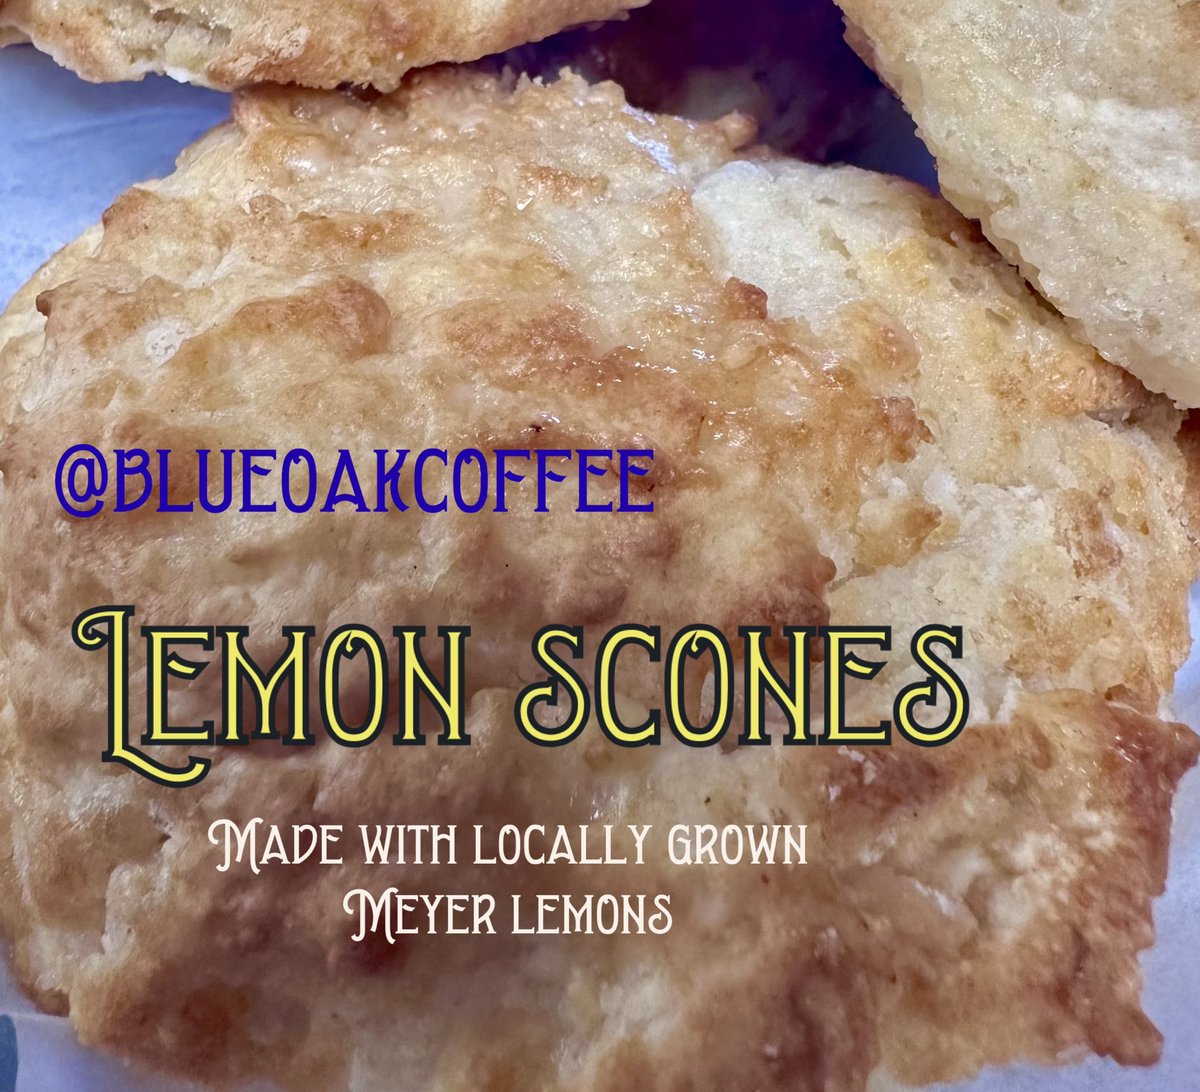 Good morning! We are here until 2pm today! Hope you all have a great day ❤️ #blueoakcoffee #downtownbakersfield #lemonscones #meyerlemon #locallygrown #madefromscratch #bakersfieldbakery #bakersfieldcoffee #scones